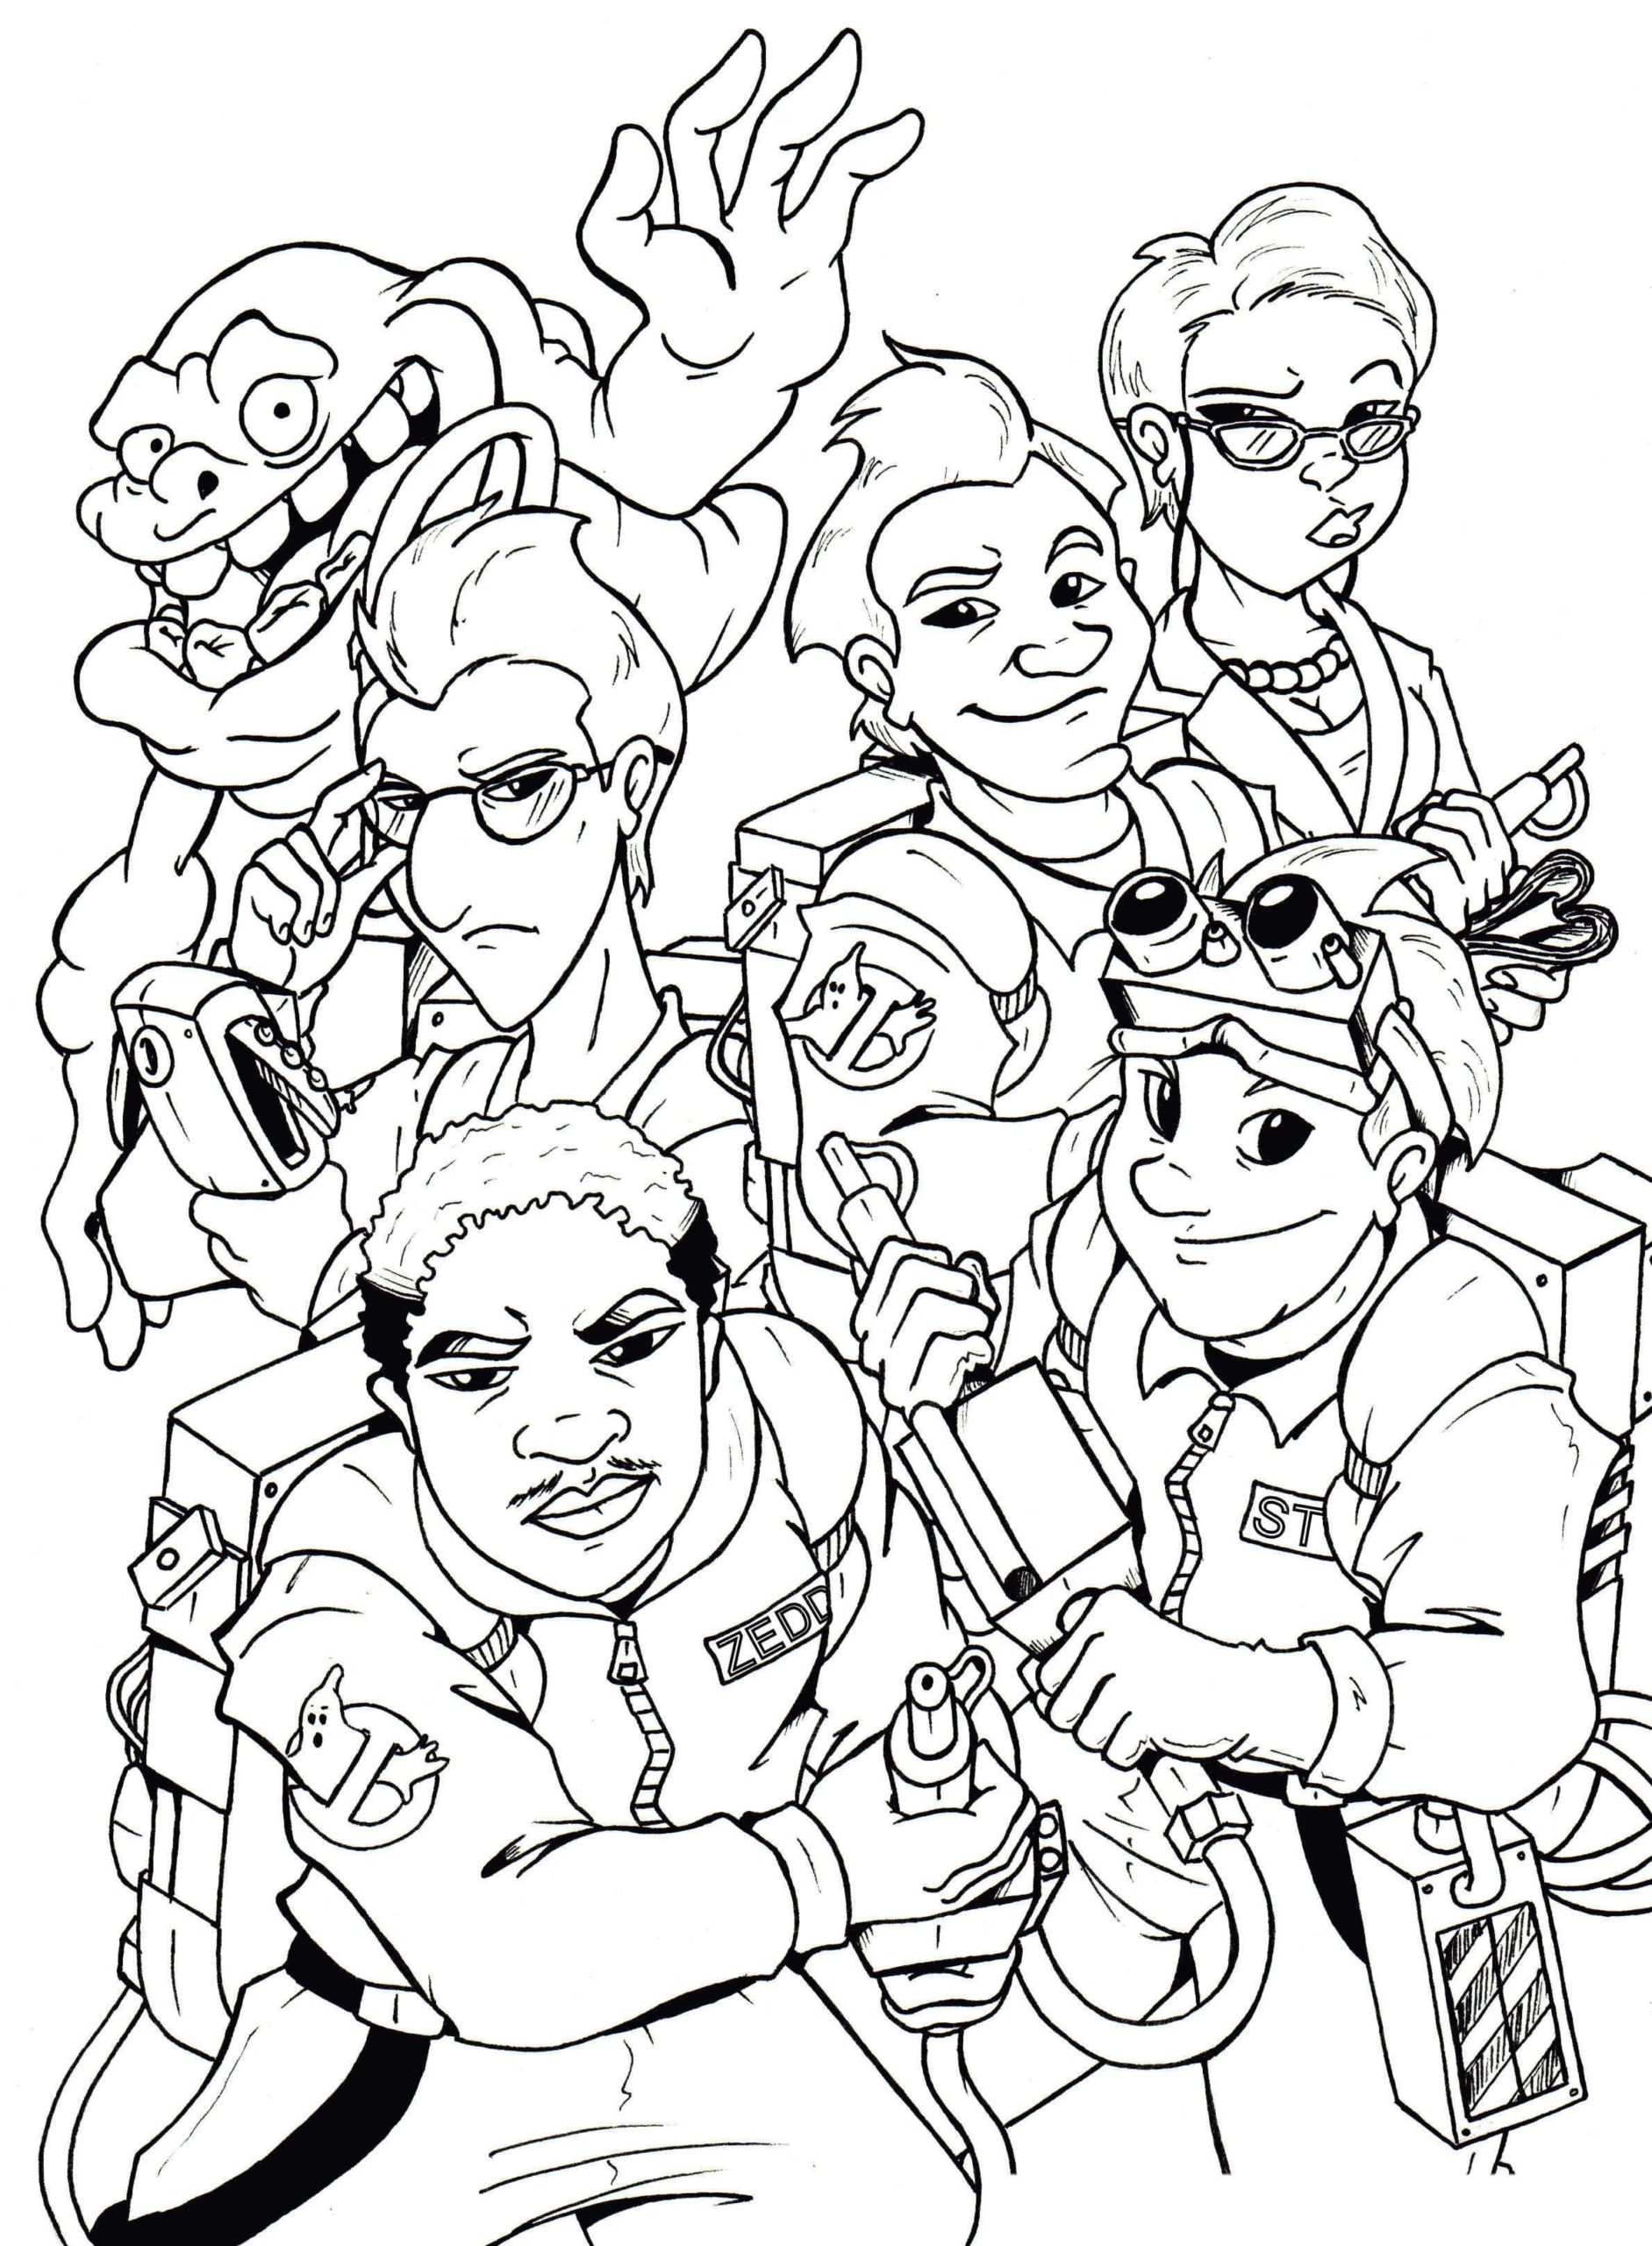 Brave And Courageous Heroes Of The Film Coloring Page